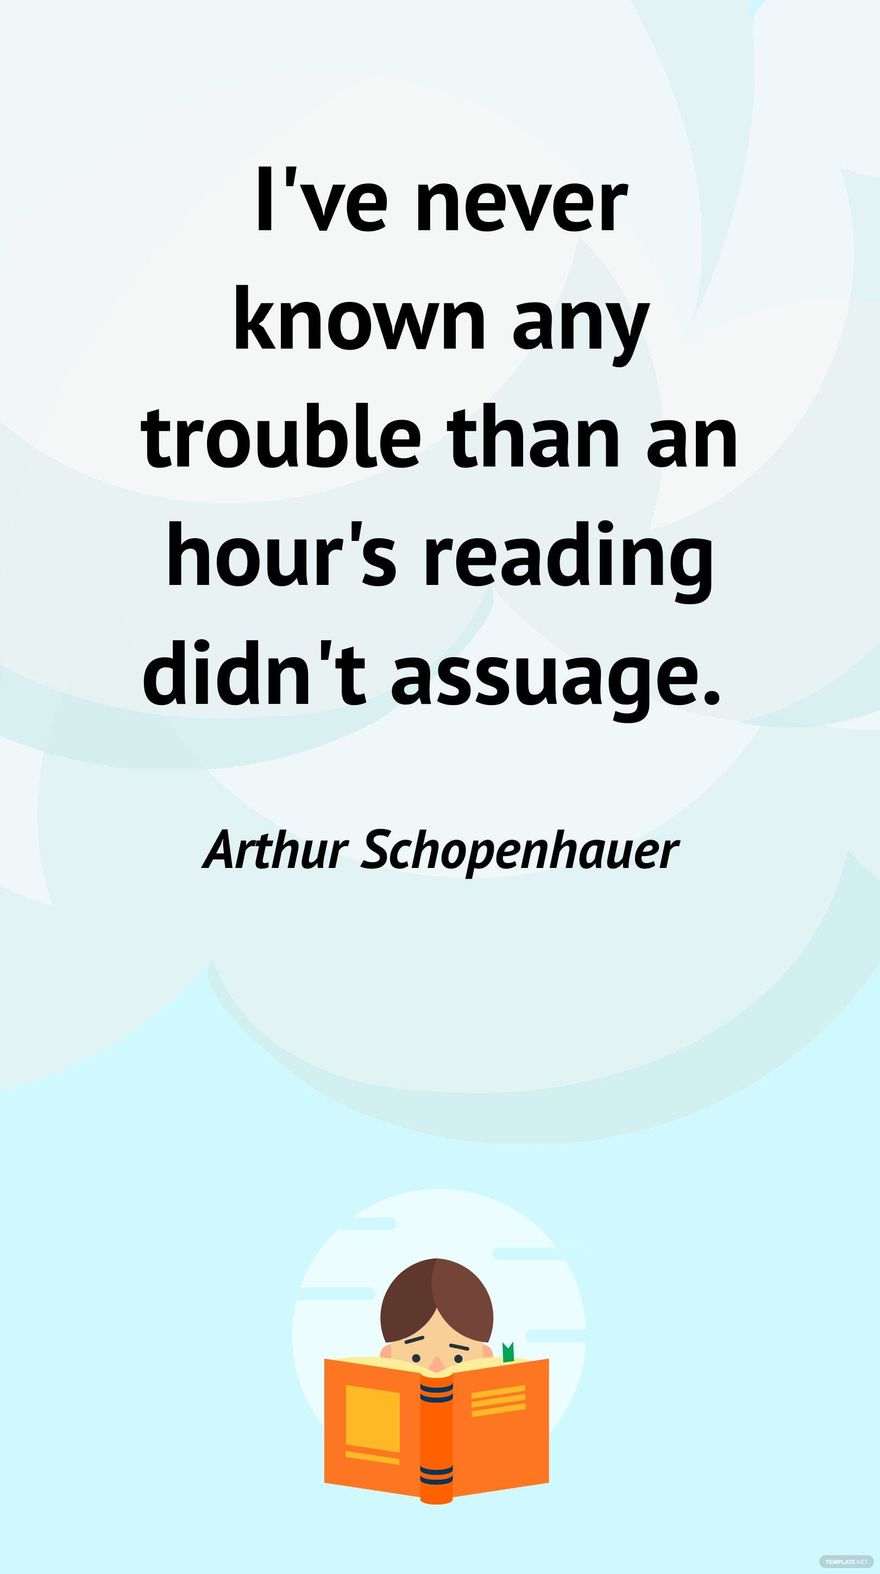 Arthur Schopenhauer - I've never known any trouble than an hour's reading didn't assuage.